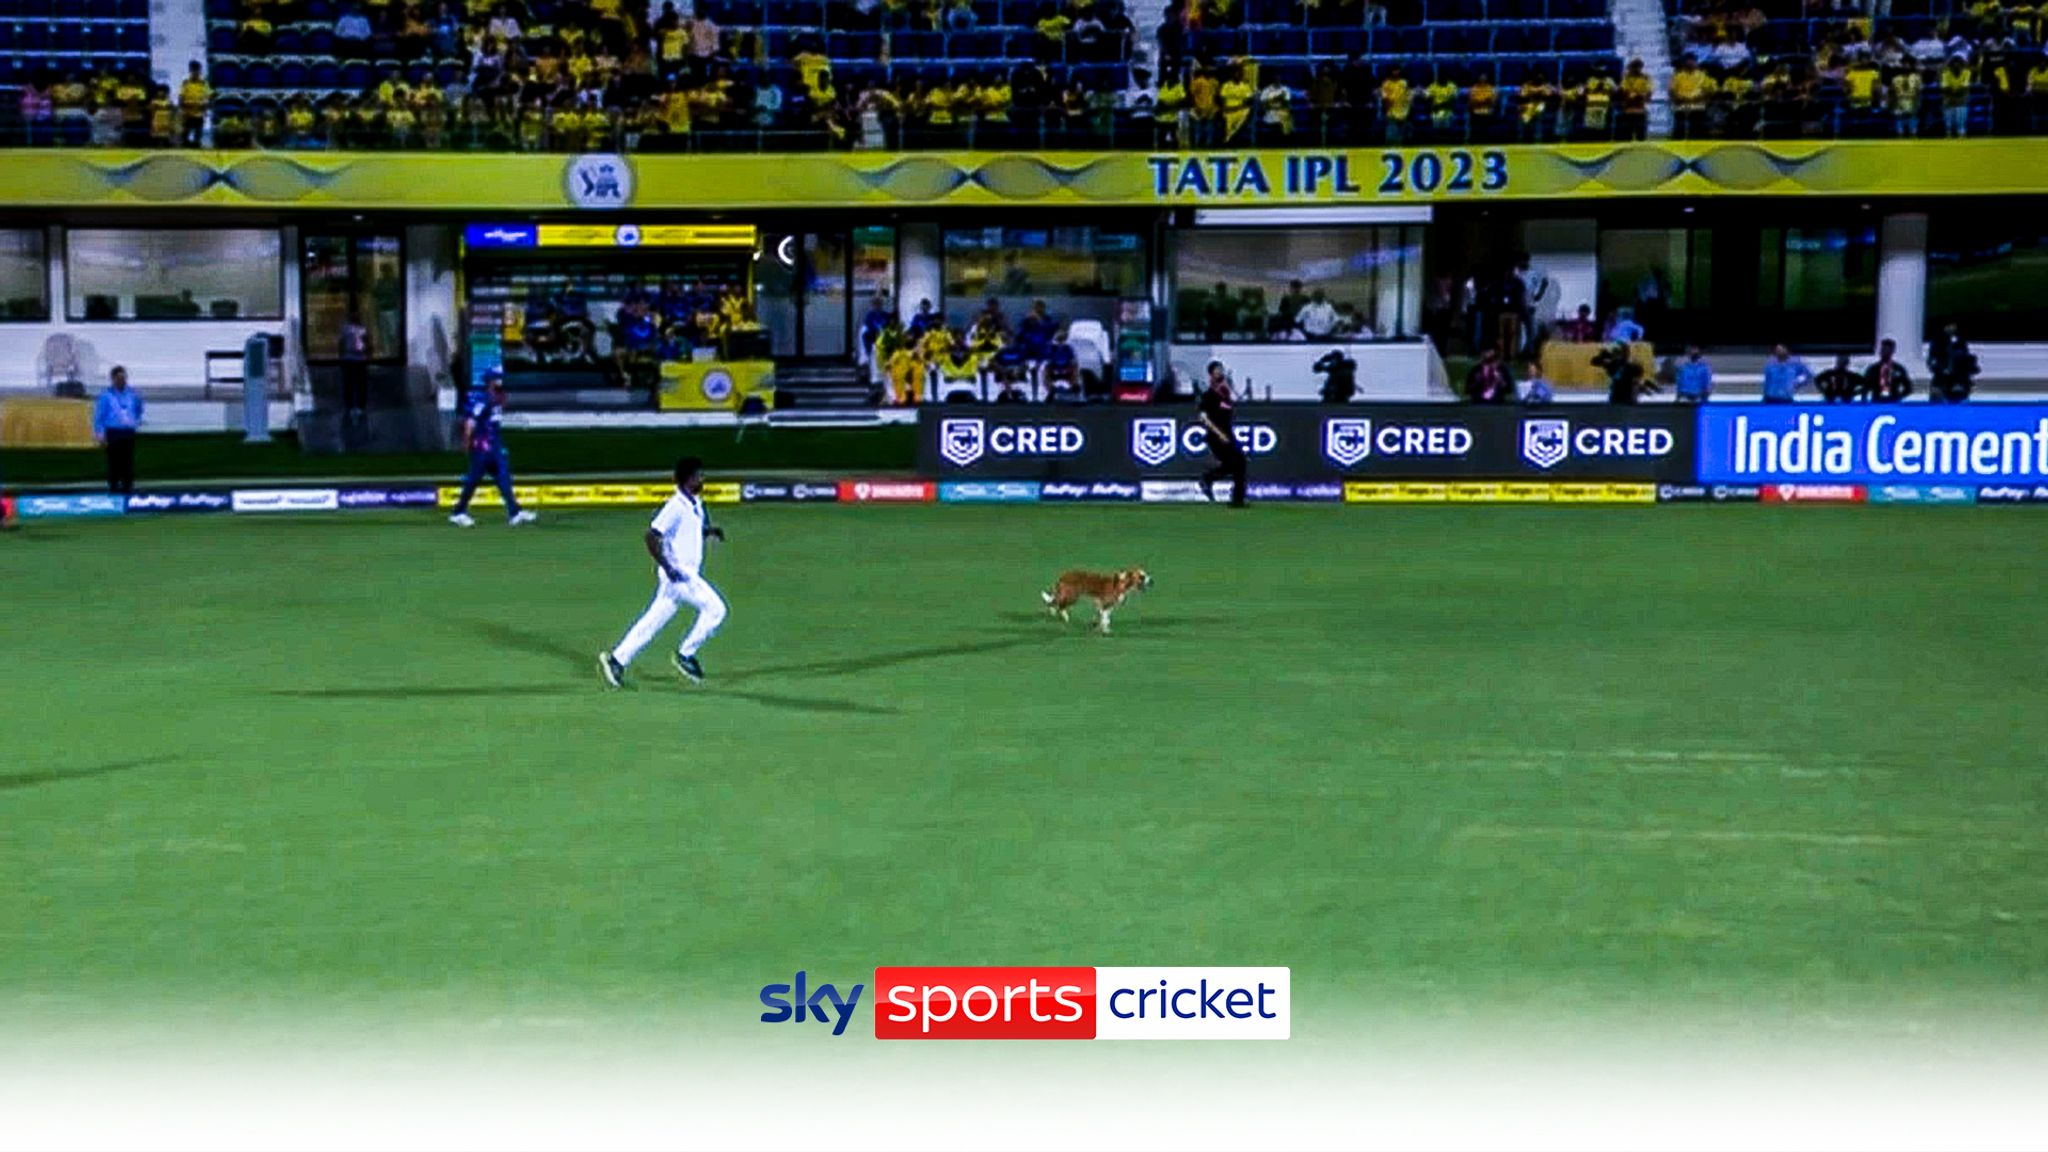 Dog invades pitch to delay start of IPL match Video Watch TV Show Sky Sports